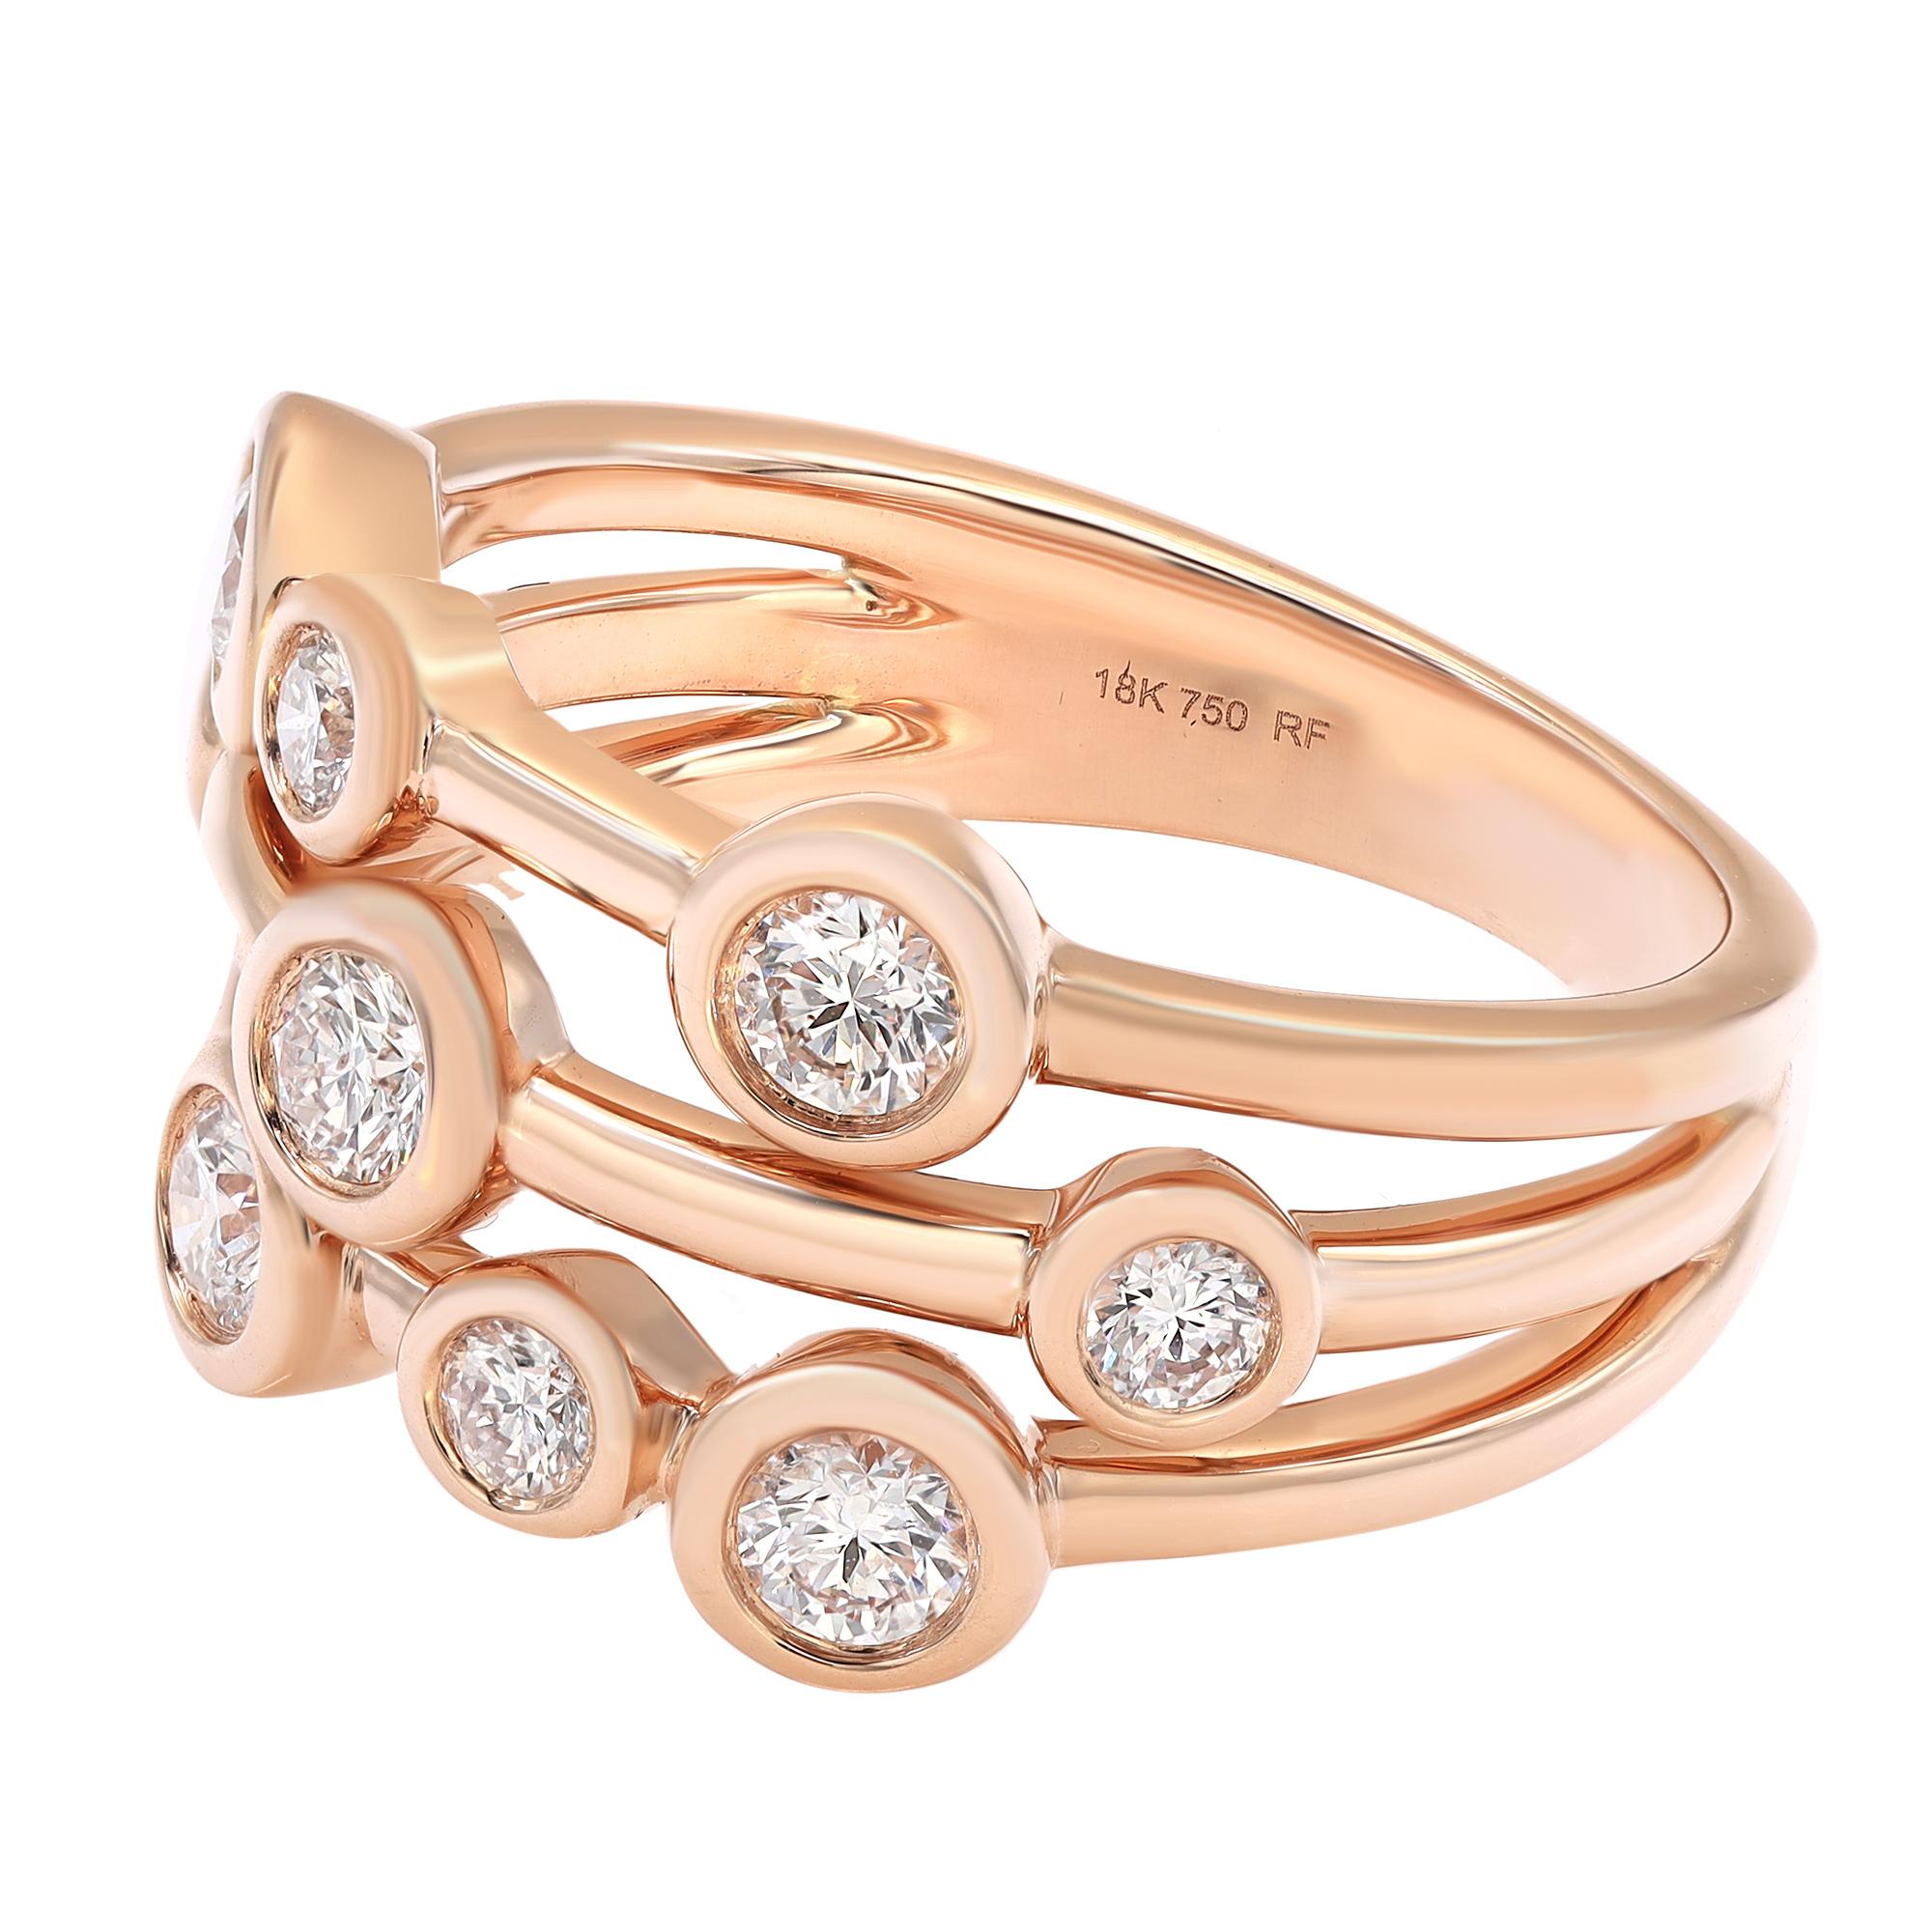 Speak of the bold and beautiful diamond ring design. This ring features 9 bezel set fine round brilliant cut diamonds crafted in high polished 18k rose gold. Total diamond weight: 0.68 carat with color G-H and VS-SI clarity. Ring size: 6.5. Ring